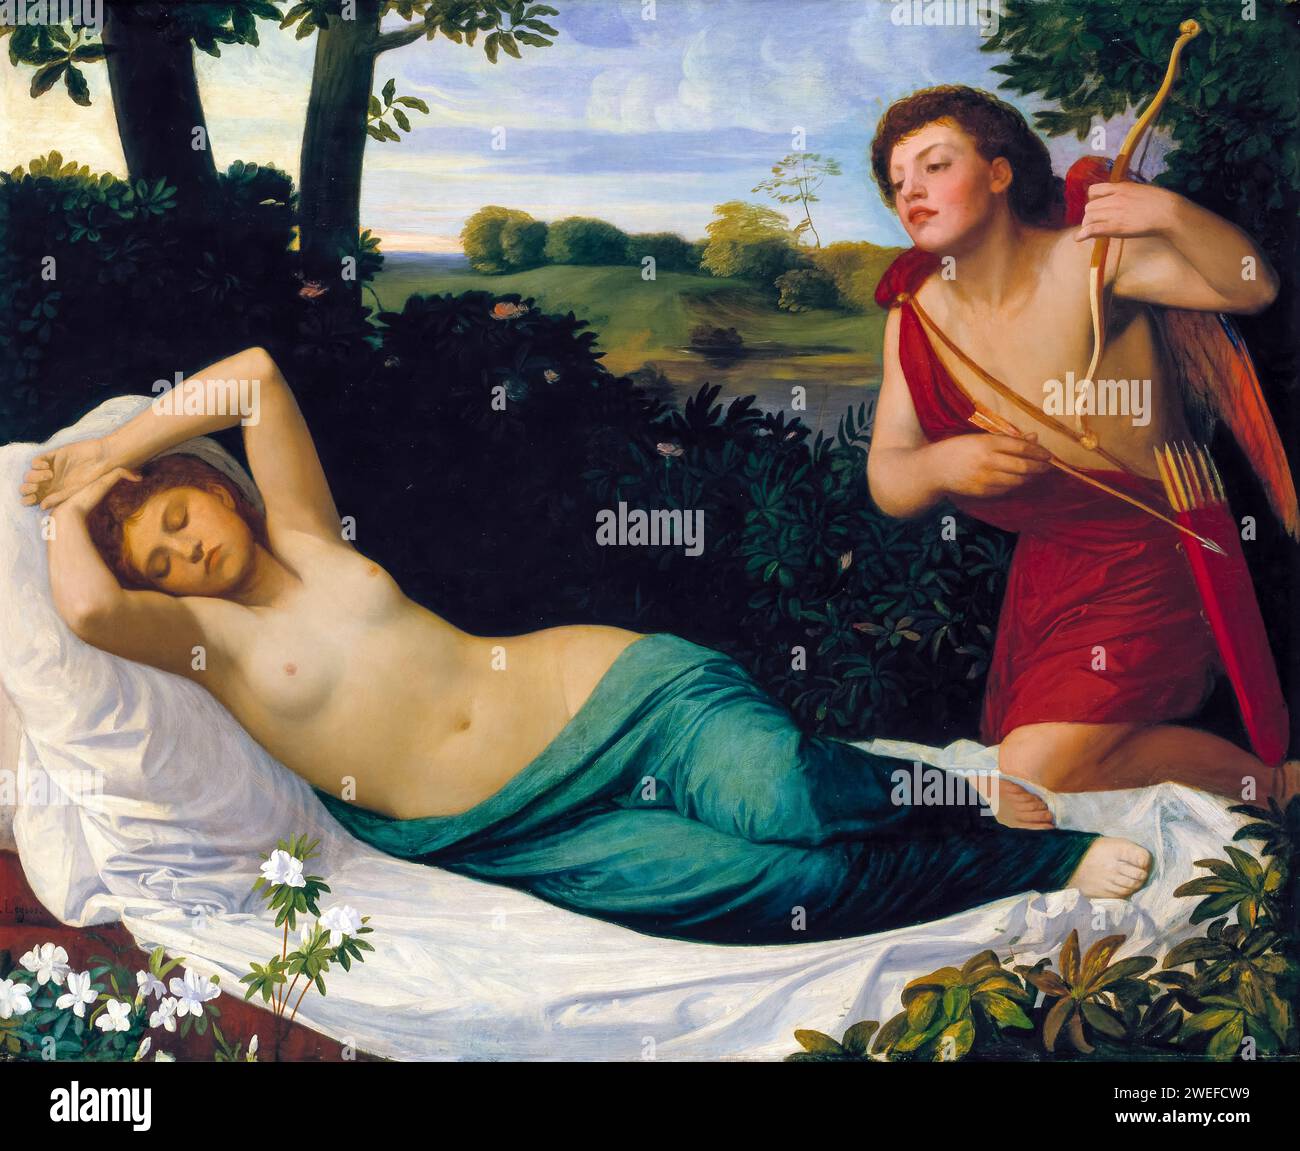 Alphonse Legros painting, Cupid and Psyche, oil on canvas, 1867 Stock Photo